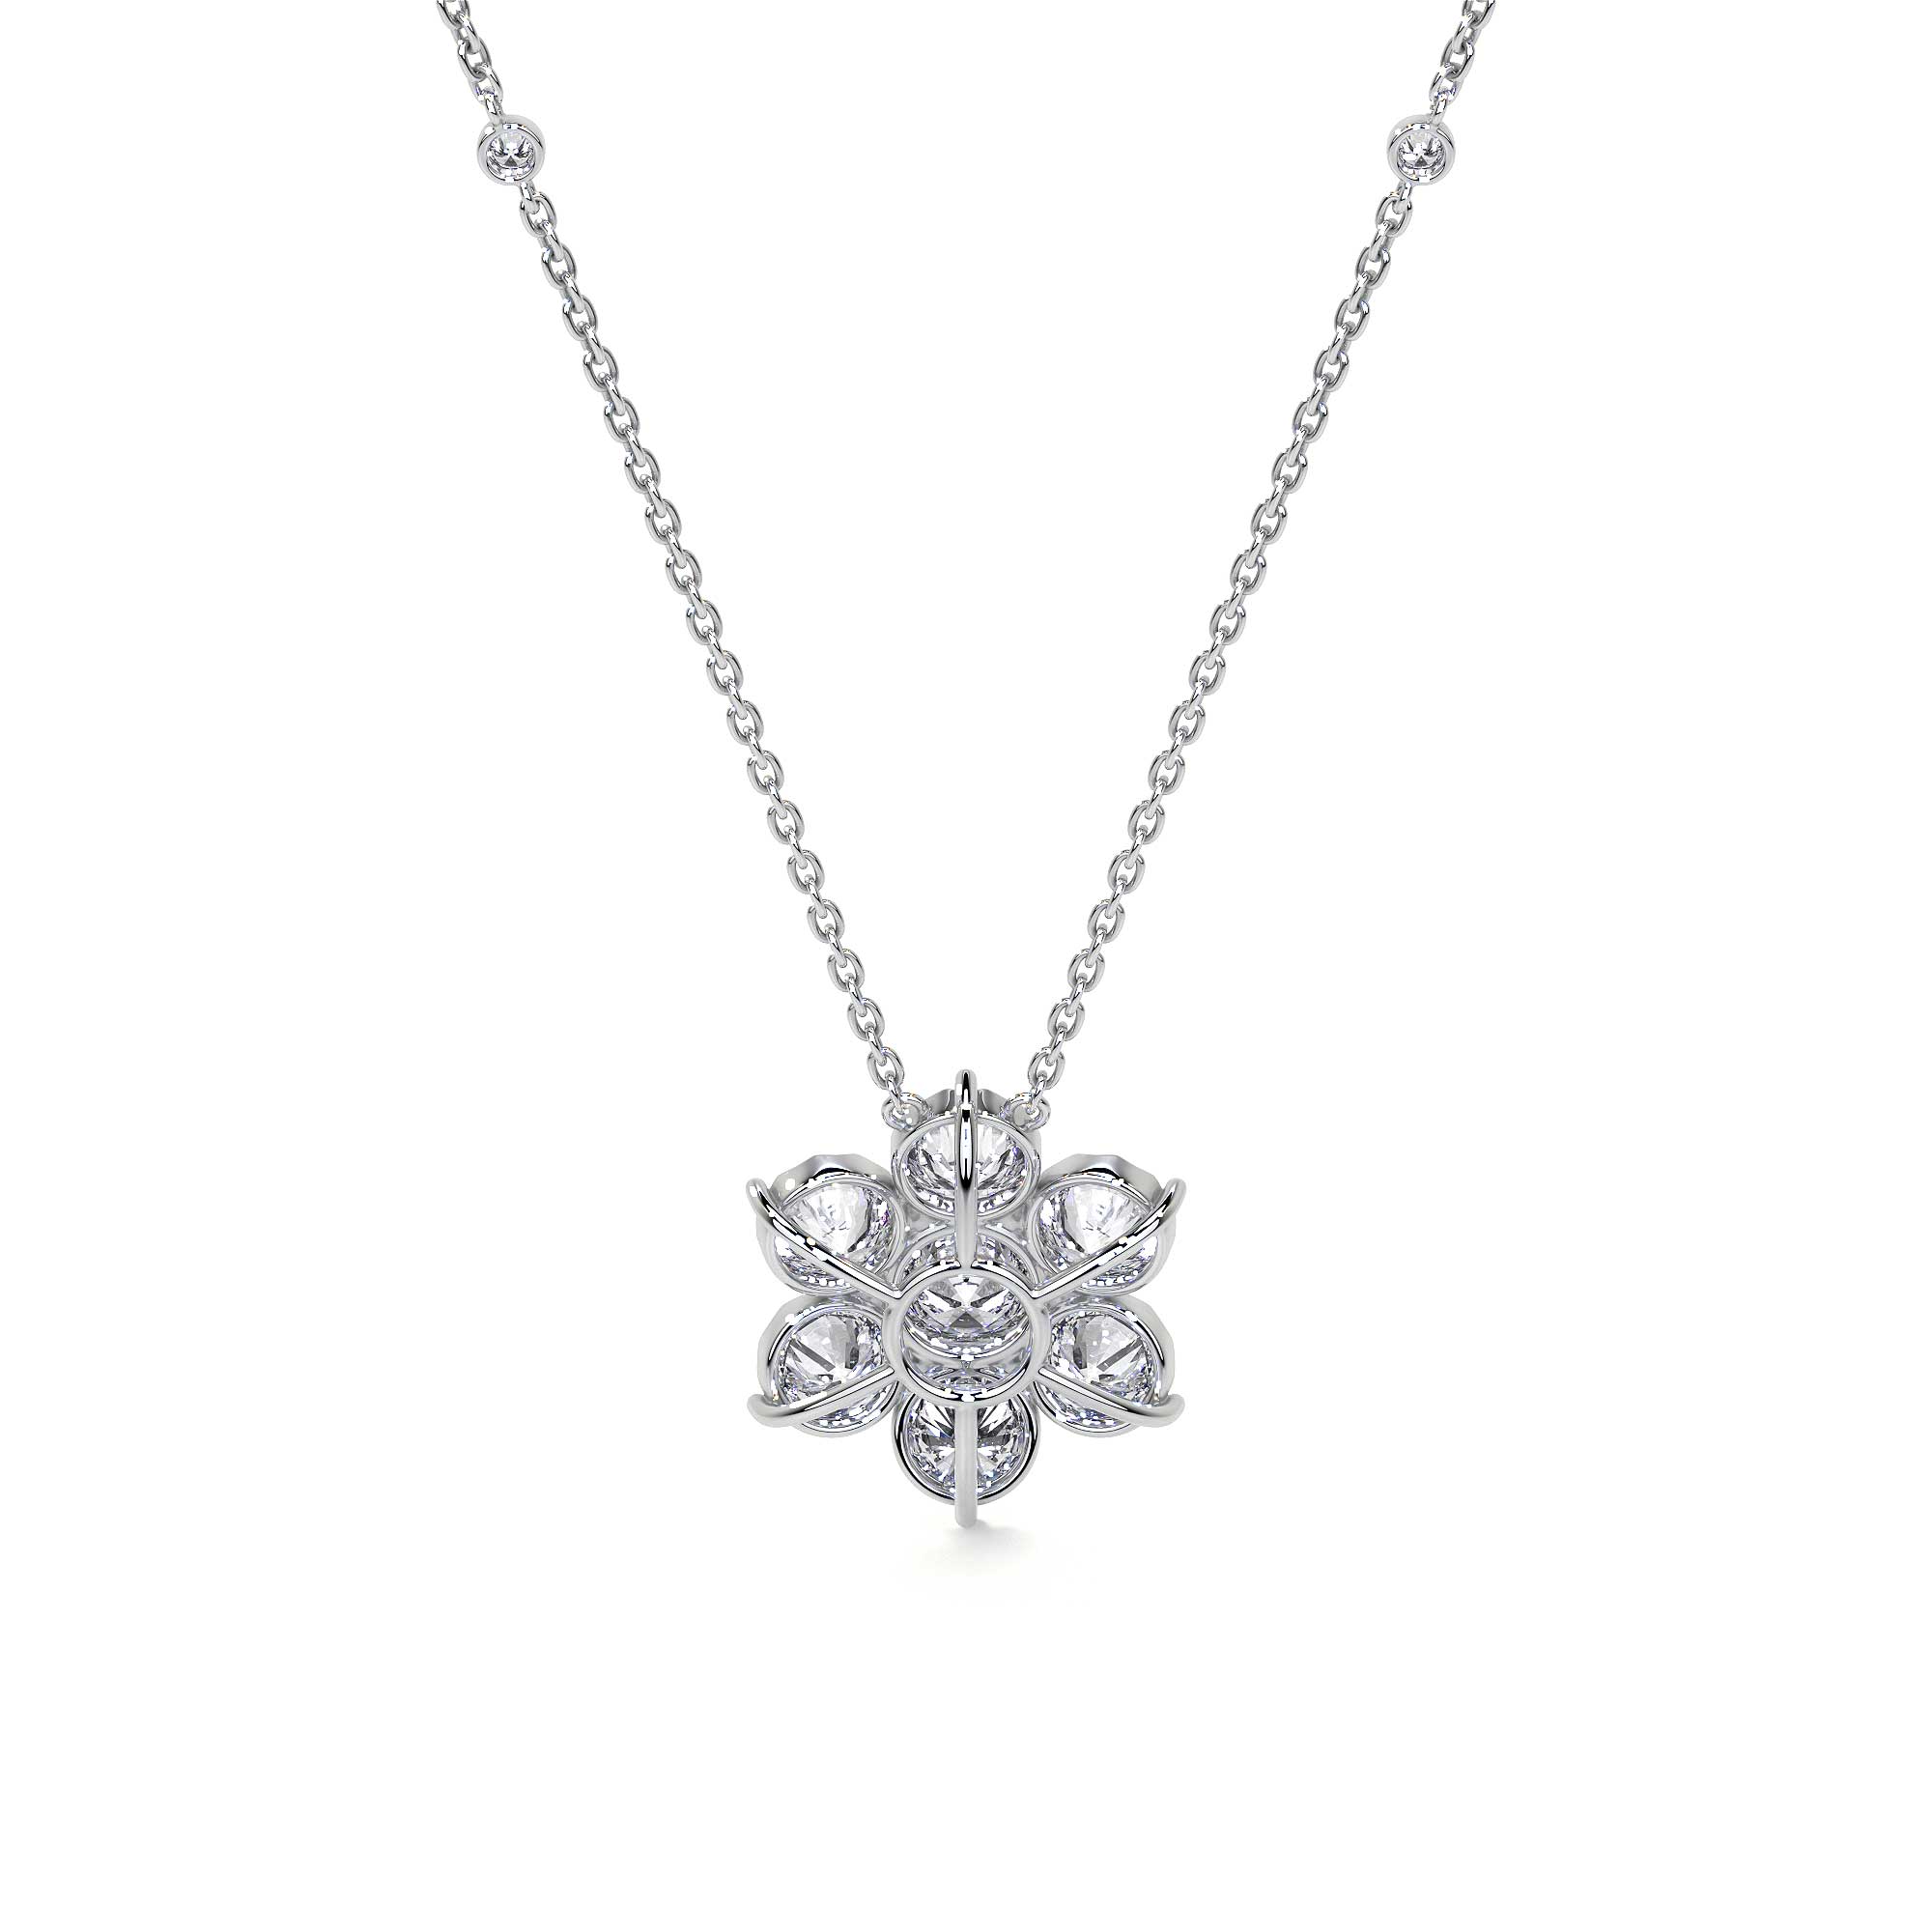 Floral Necklace - Buy Floral Necklace online in India